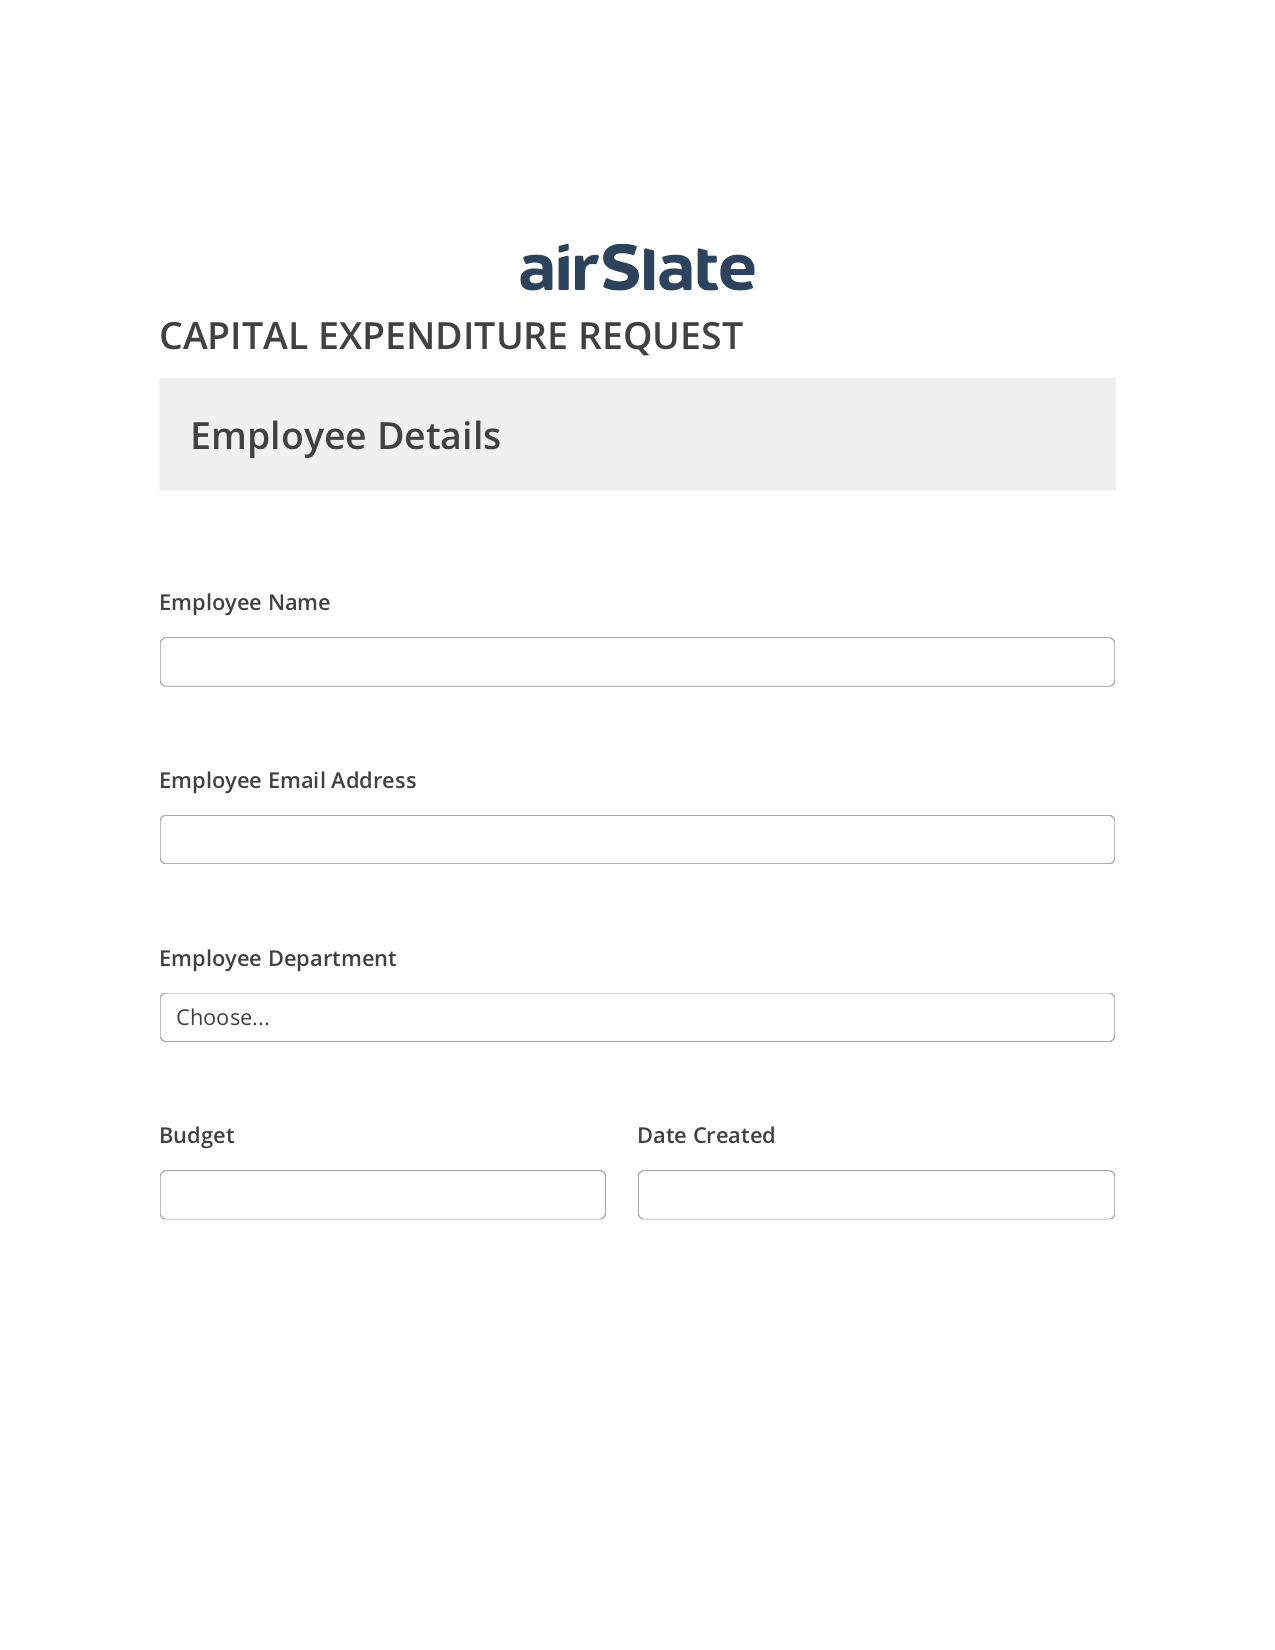 Capital Expenditure Request Approval Workflow Pre-fill from CSV File Dropdown Options Bot, Create Salesforce Record Bot, Export to Smartsheet